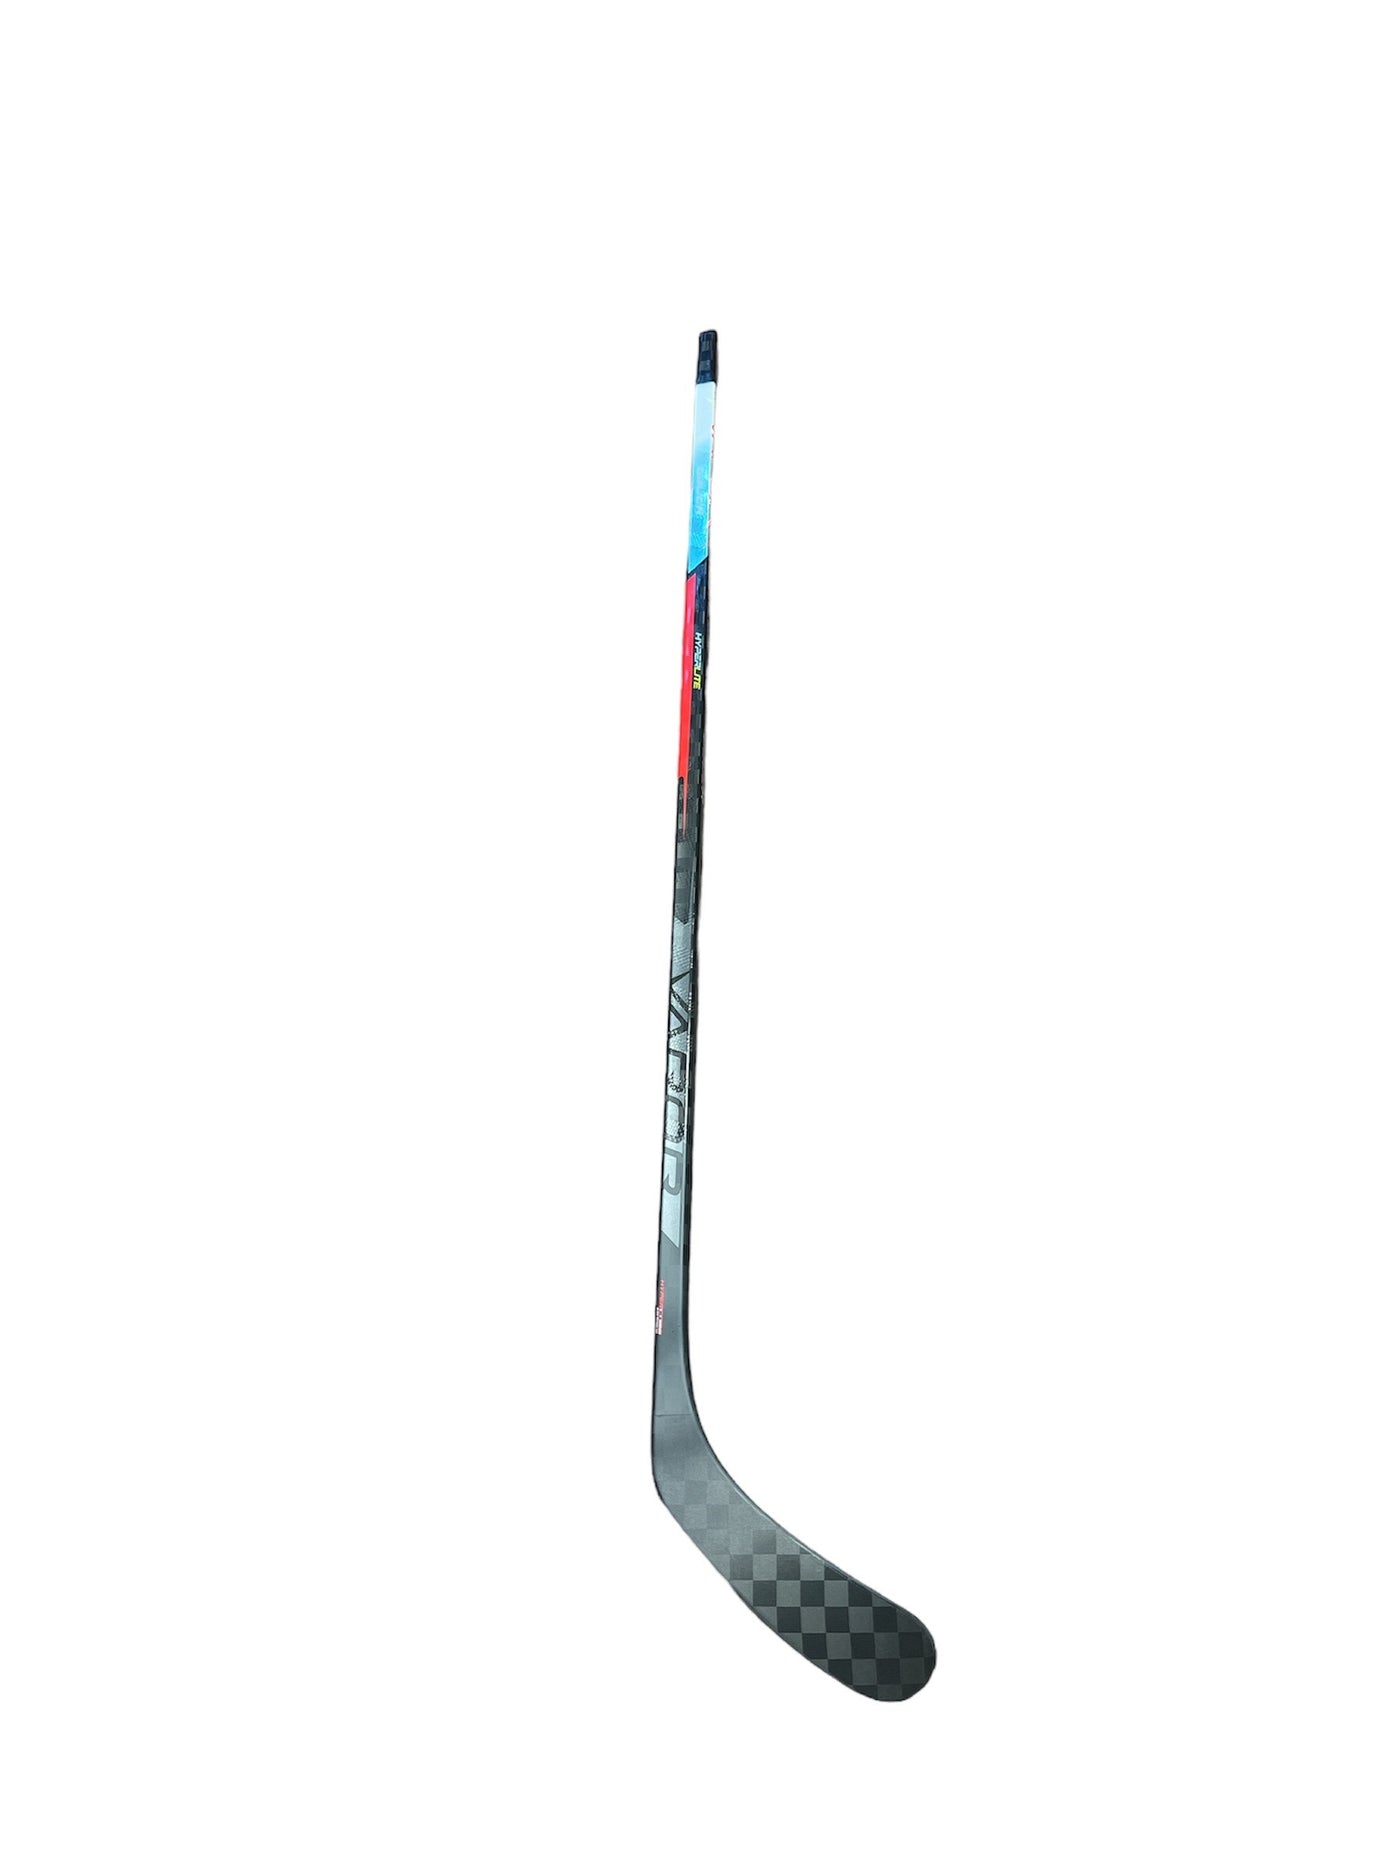 SEGUIN NEW BAUER TEAM ISSUED STICK - View of stick